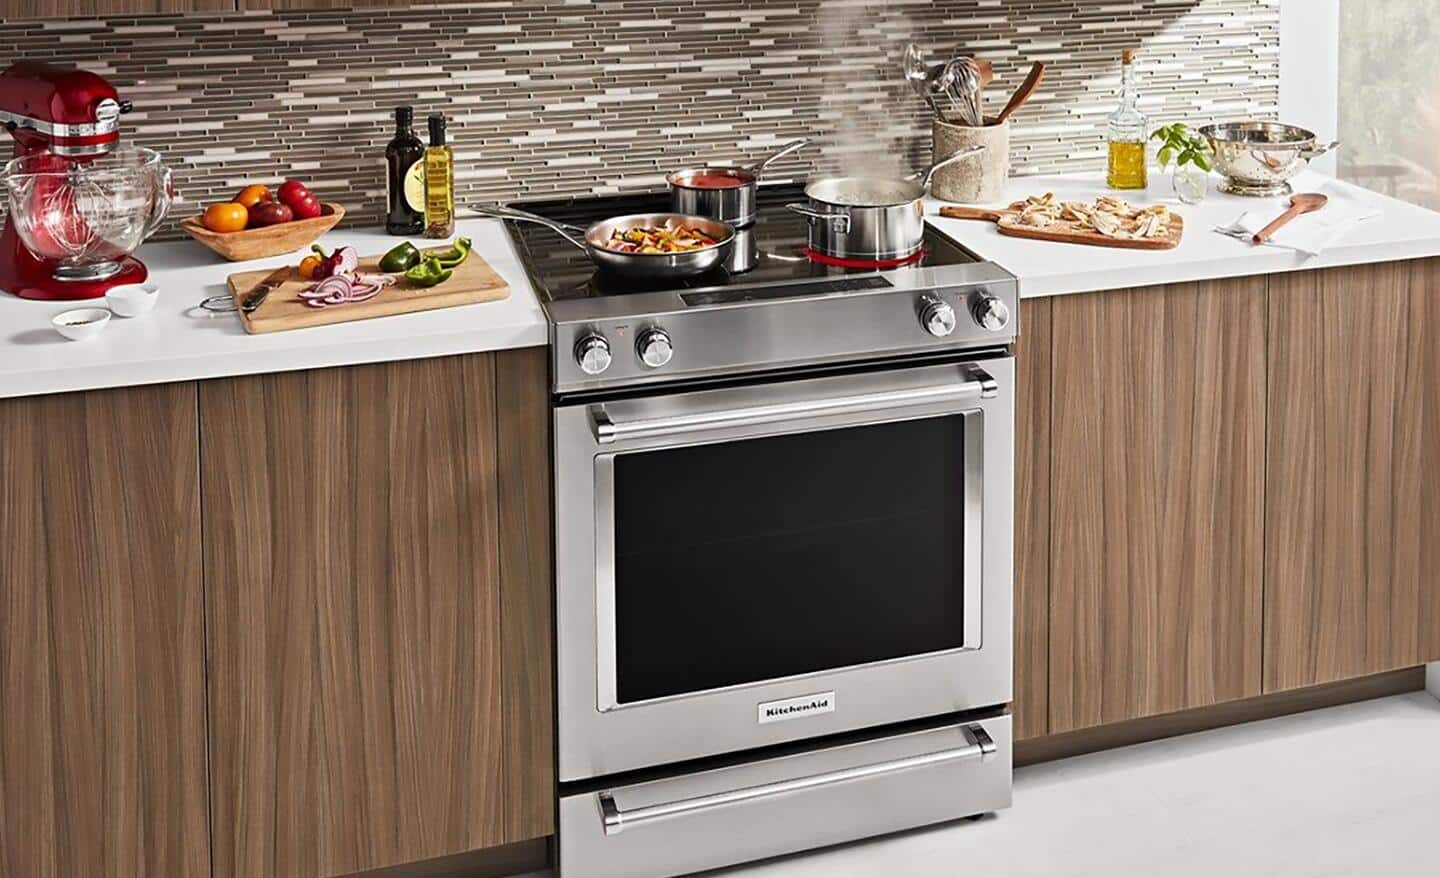 A convection oven sits in a kitchen surrounded by food preparation on countertops. It is the size of a conventional oven, and it has a stovetop with food being cooked on it.